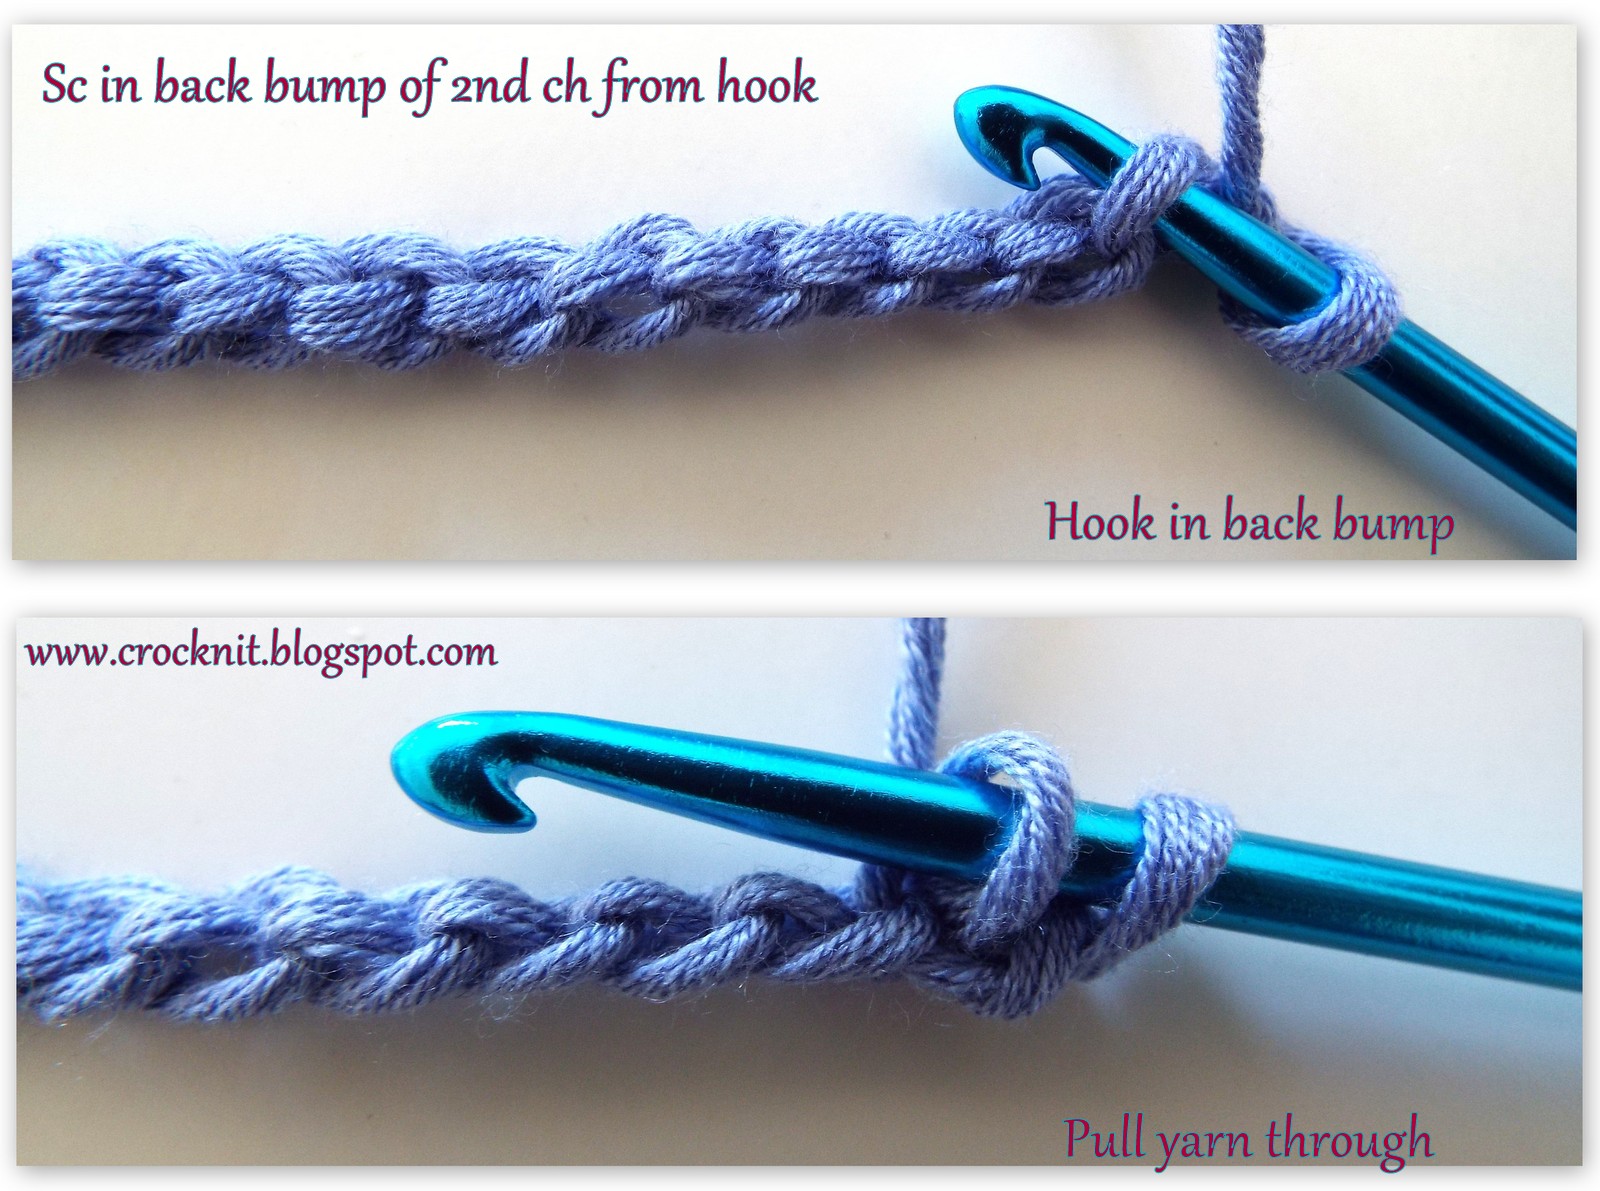 MICROCKNIT CREATIONS: How to Crochet in Back Bump Tutorial